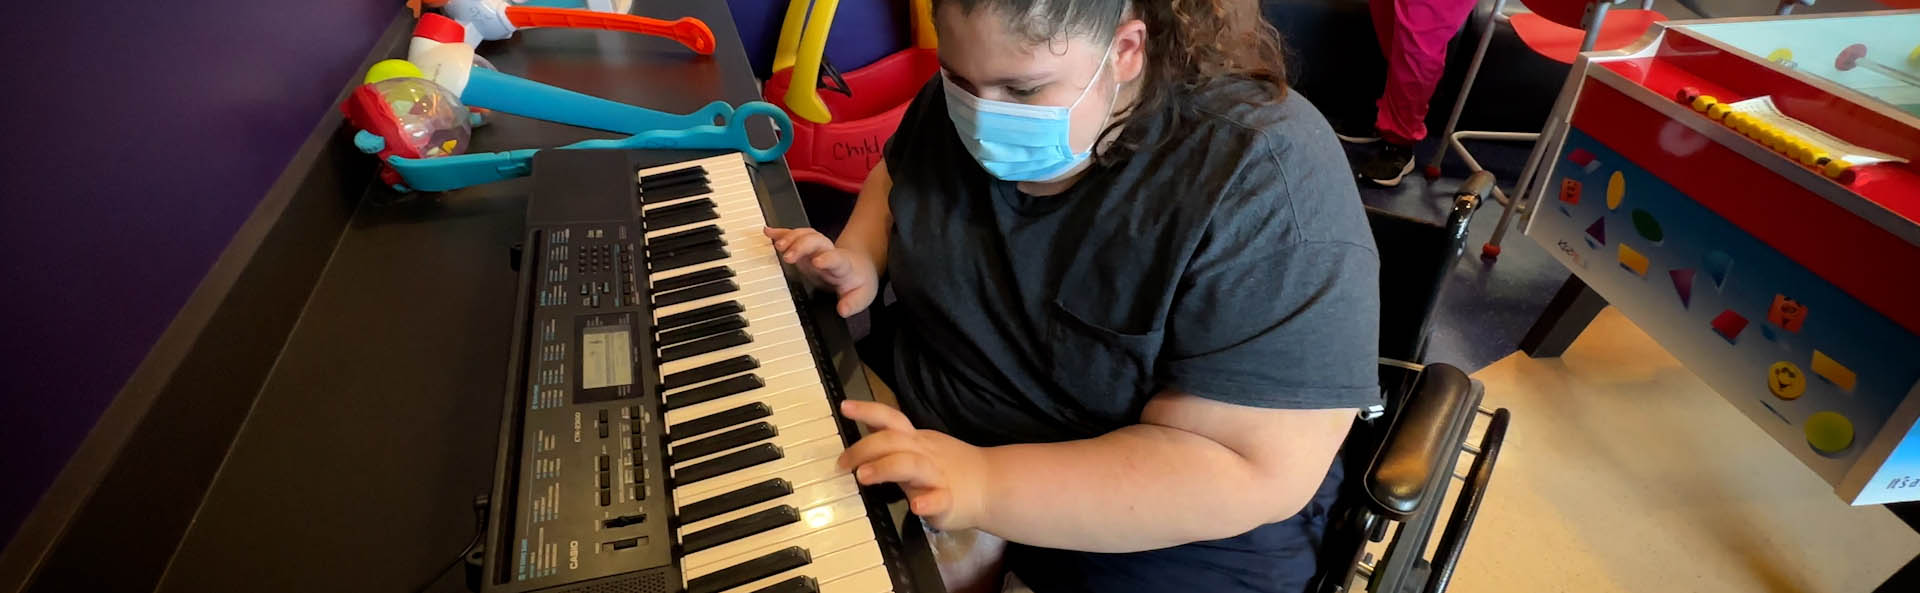 A child in a mask playing on a keyboard